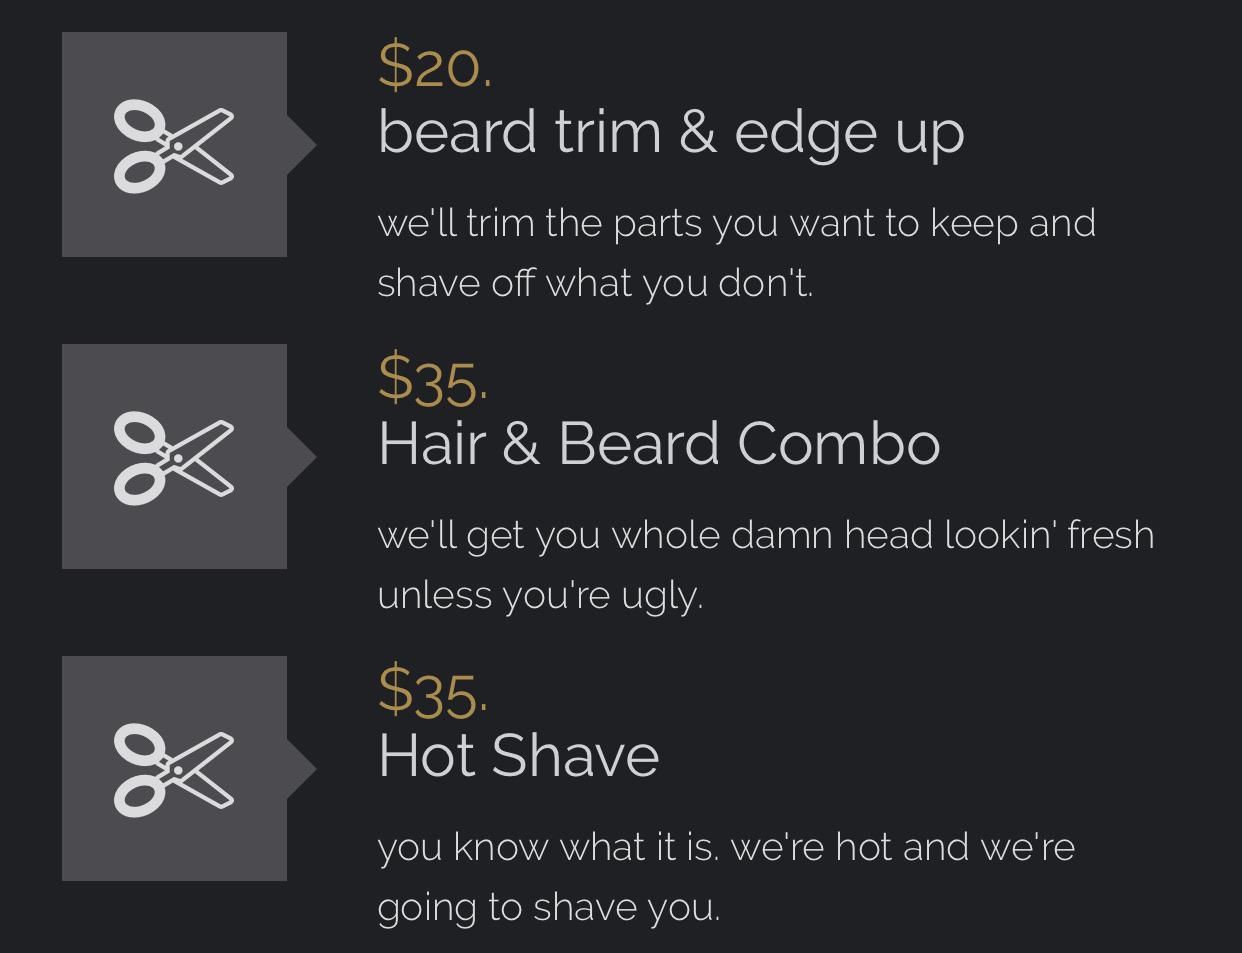 This barber describes the services they offer